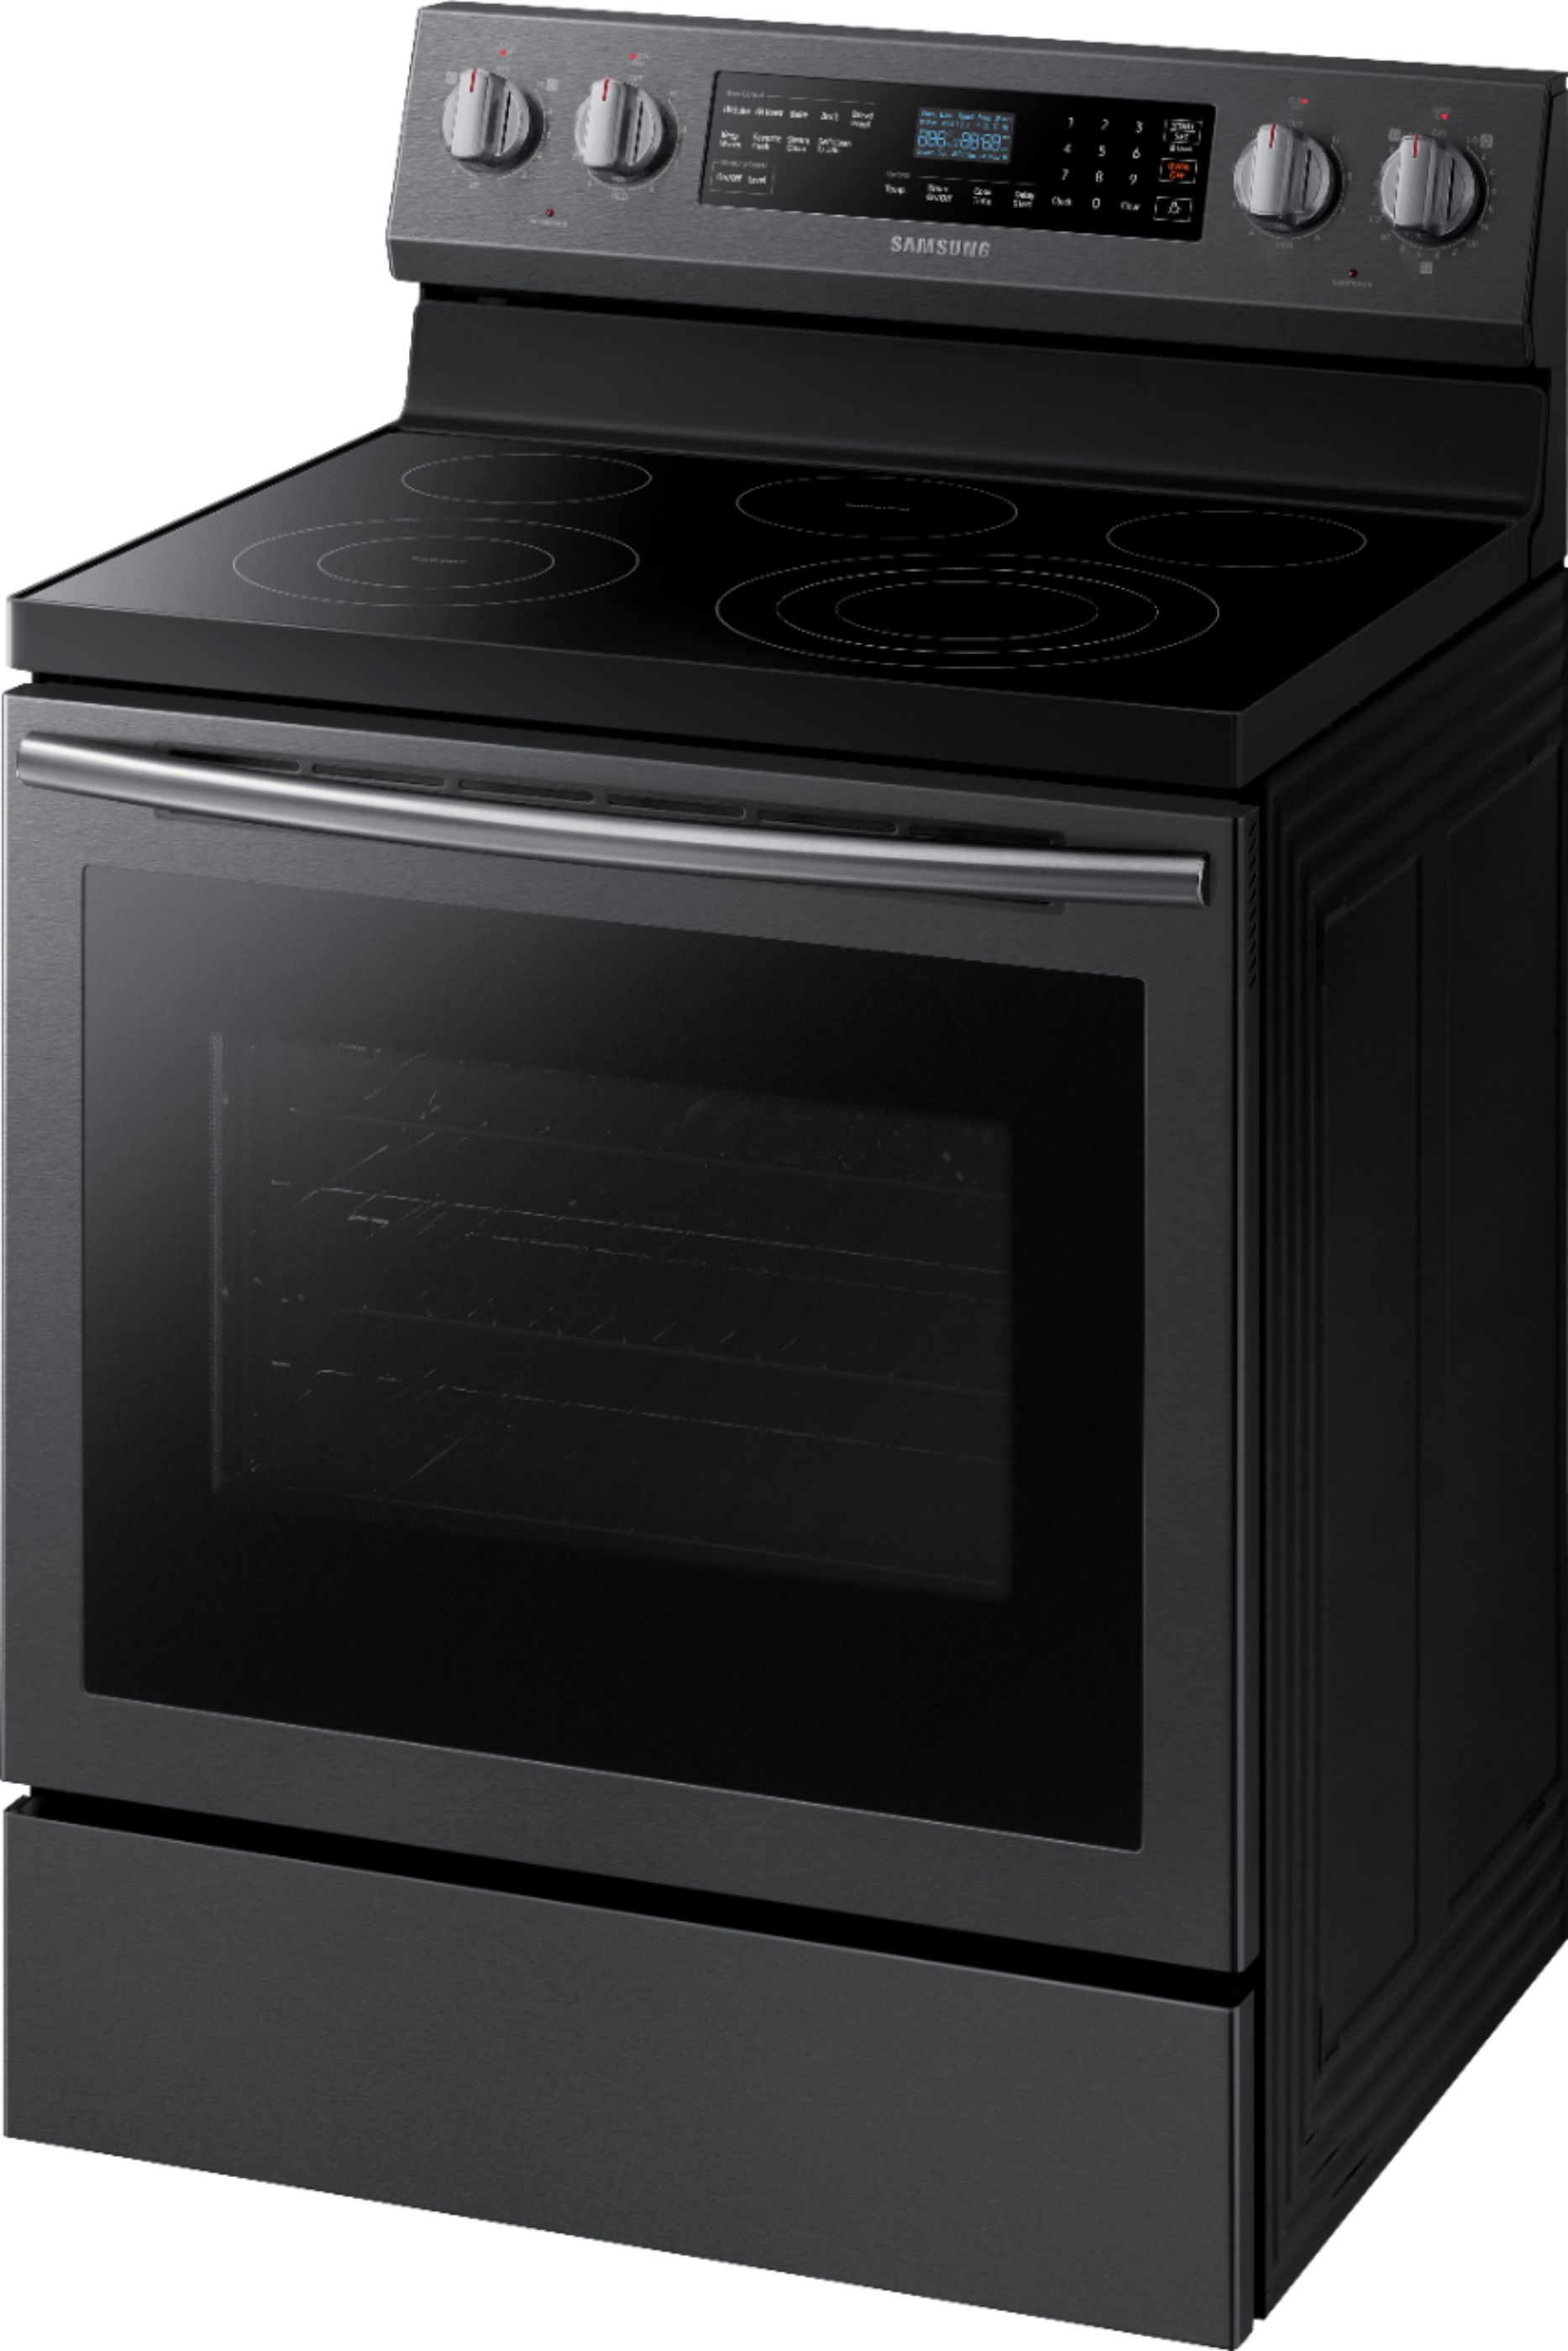 Left View: Samsung - 5.8 cu. ft. Freestanding Electric Convection Range with Air Fry, Fingerprint Resistant - Stainless Steel